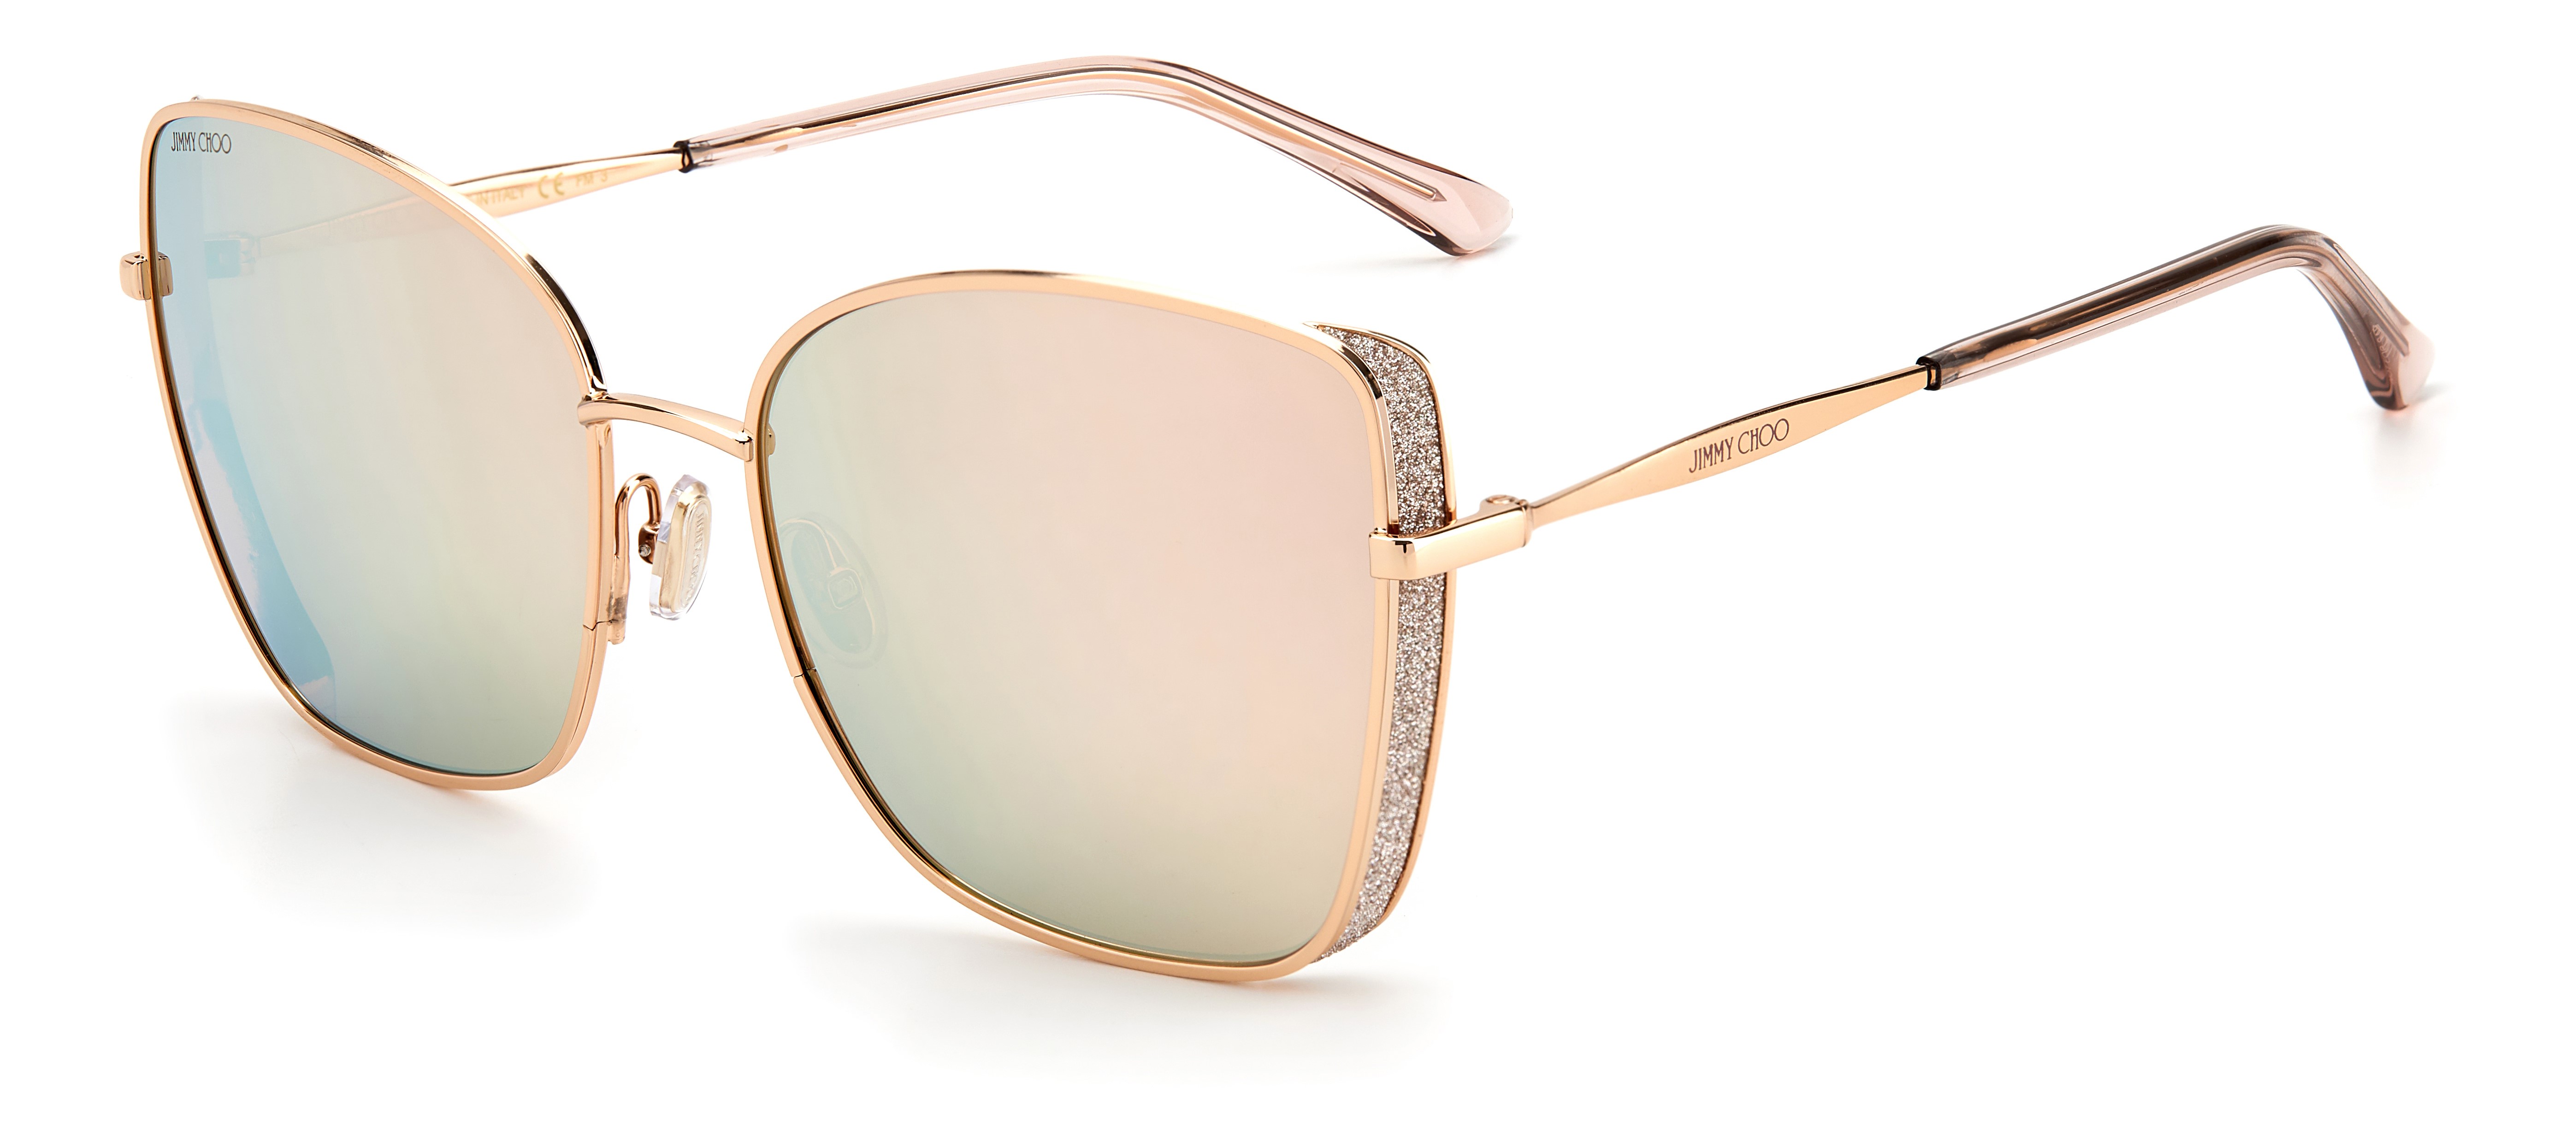 Alexis Women's Sunglasses - (Rose Gold with Grey Gold Mirror Effect Lenses)